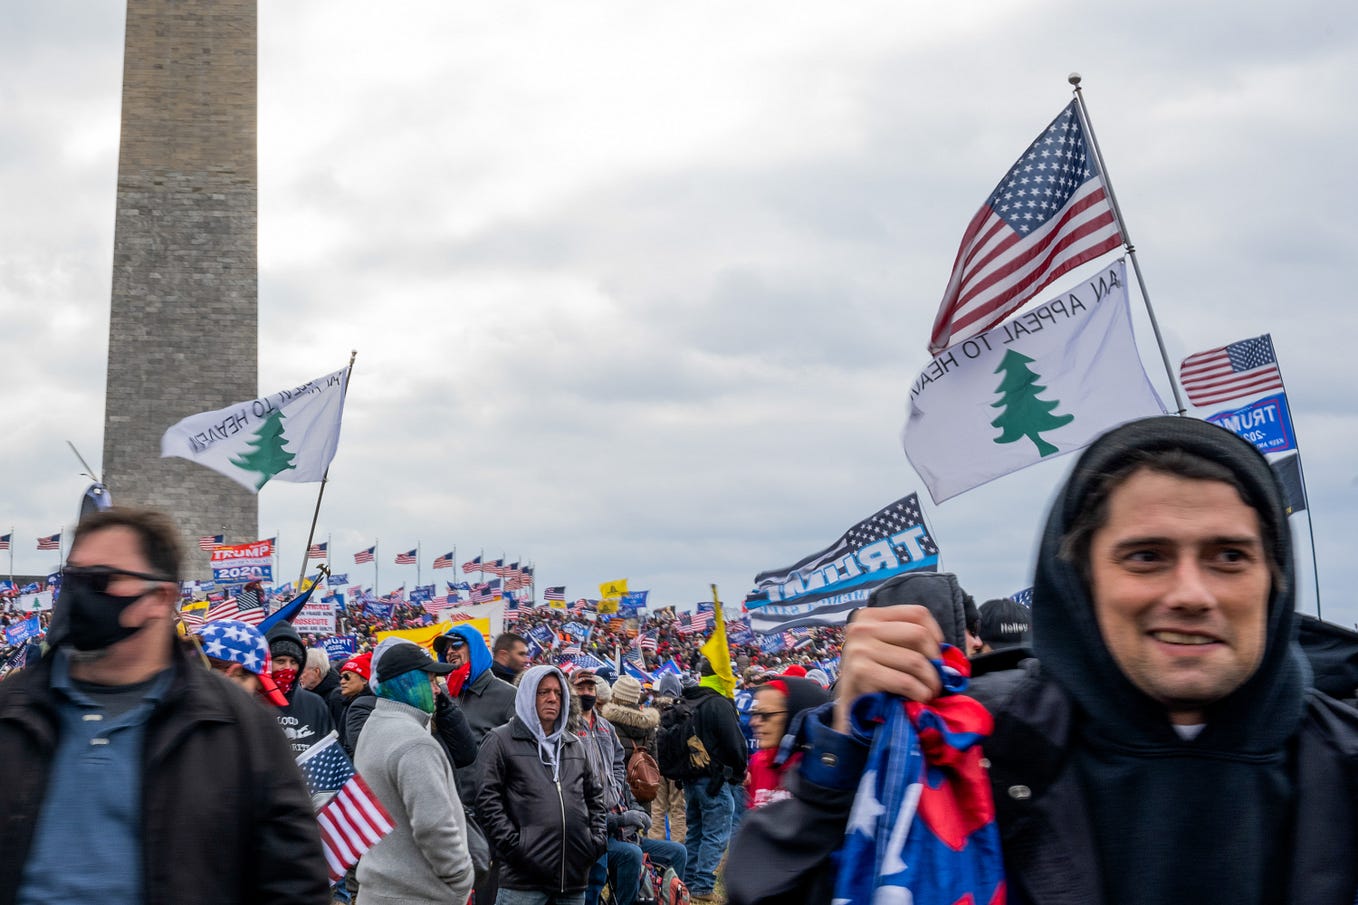 The Pine Tree flag: How one symbol at the Capitol riot connects far-right extremism to Christianity